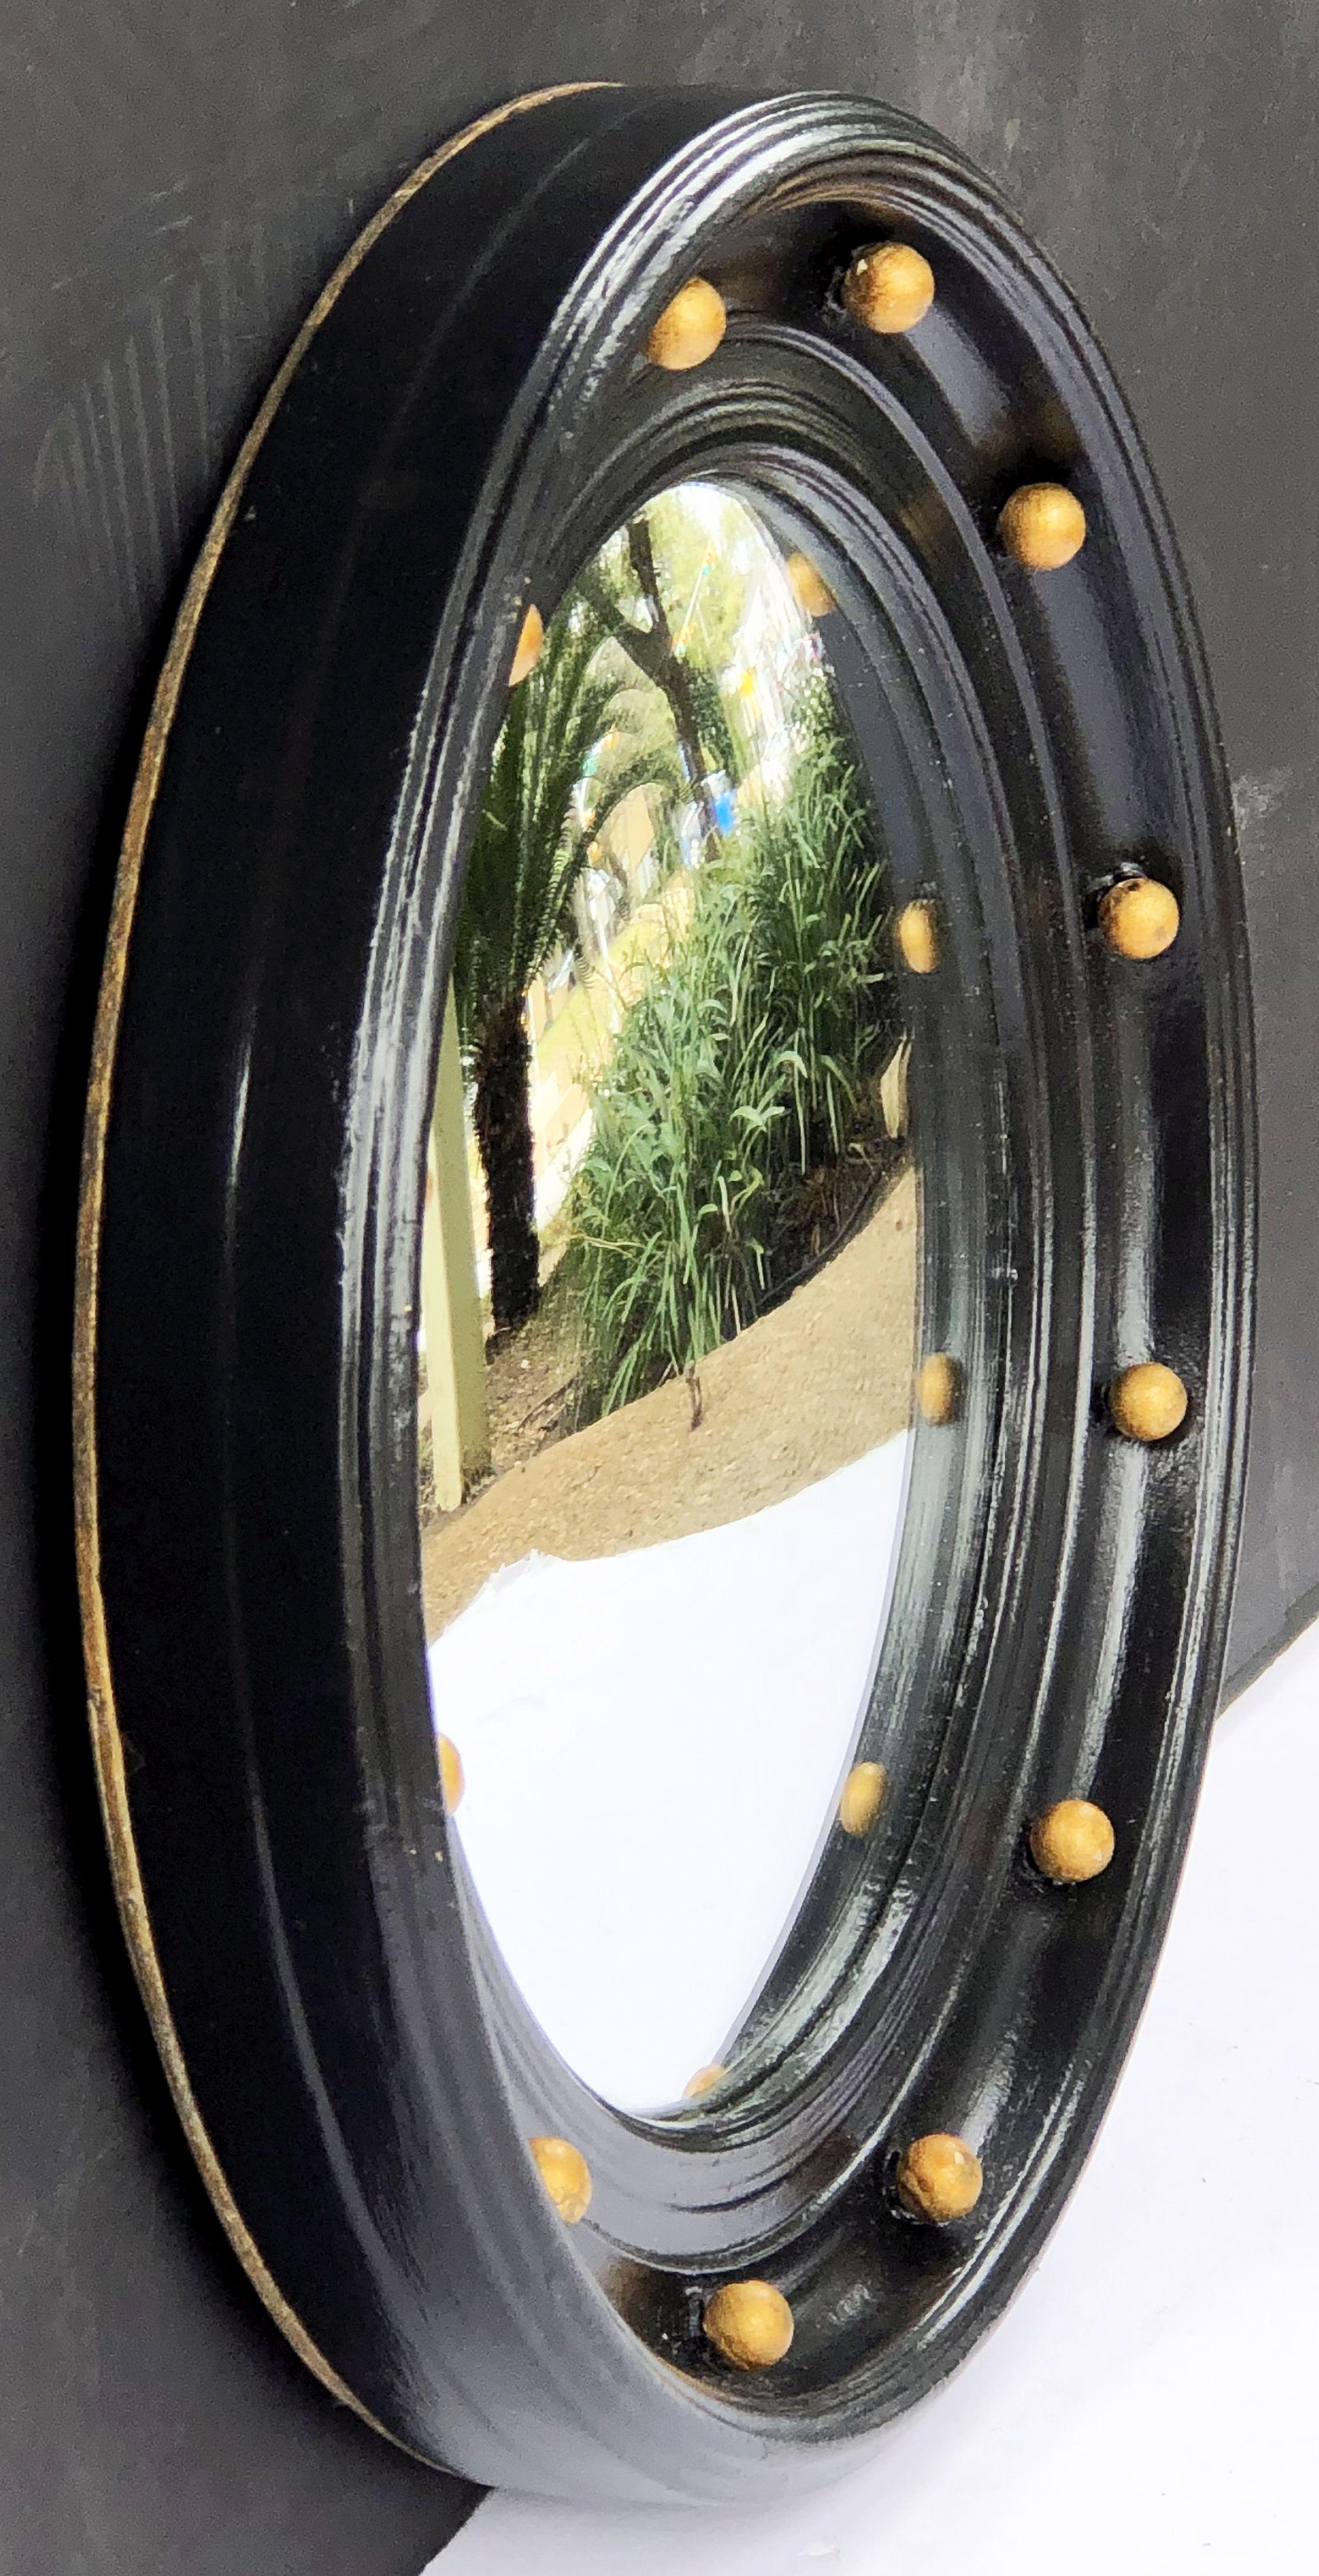 A fine English round or circular convex mirror featuring a Regency design of a molded, ebonized frame with gilt balls around the circumference.

Measures: Diameter is 14 inches.